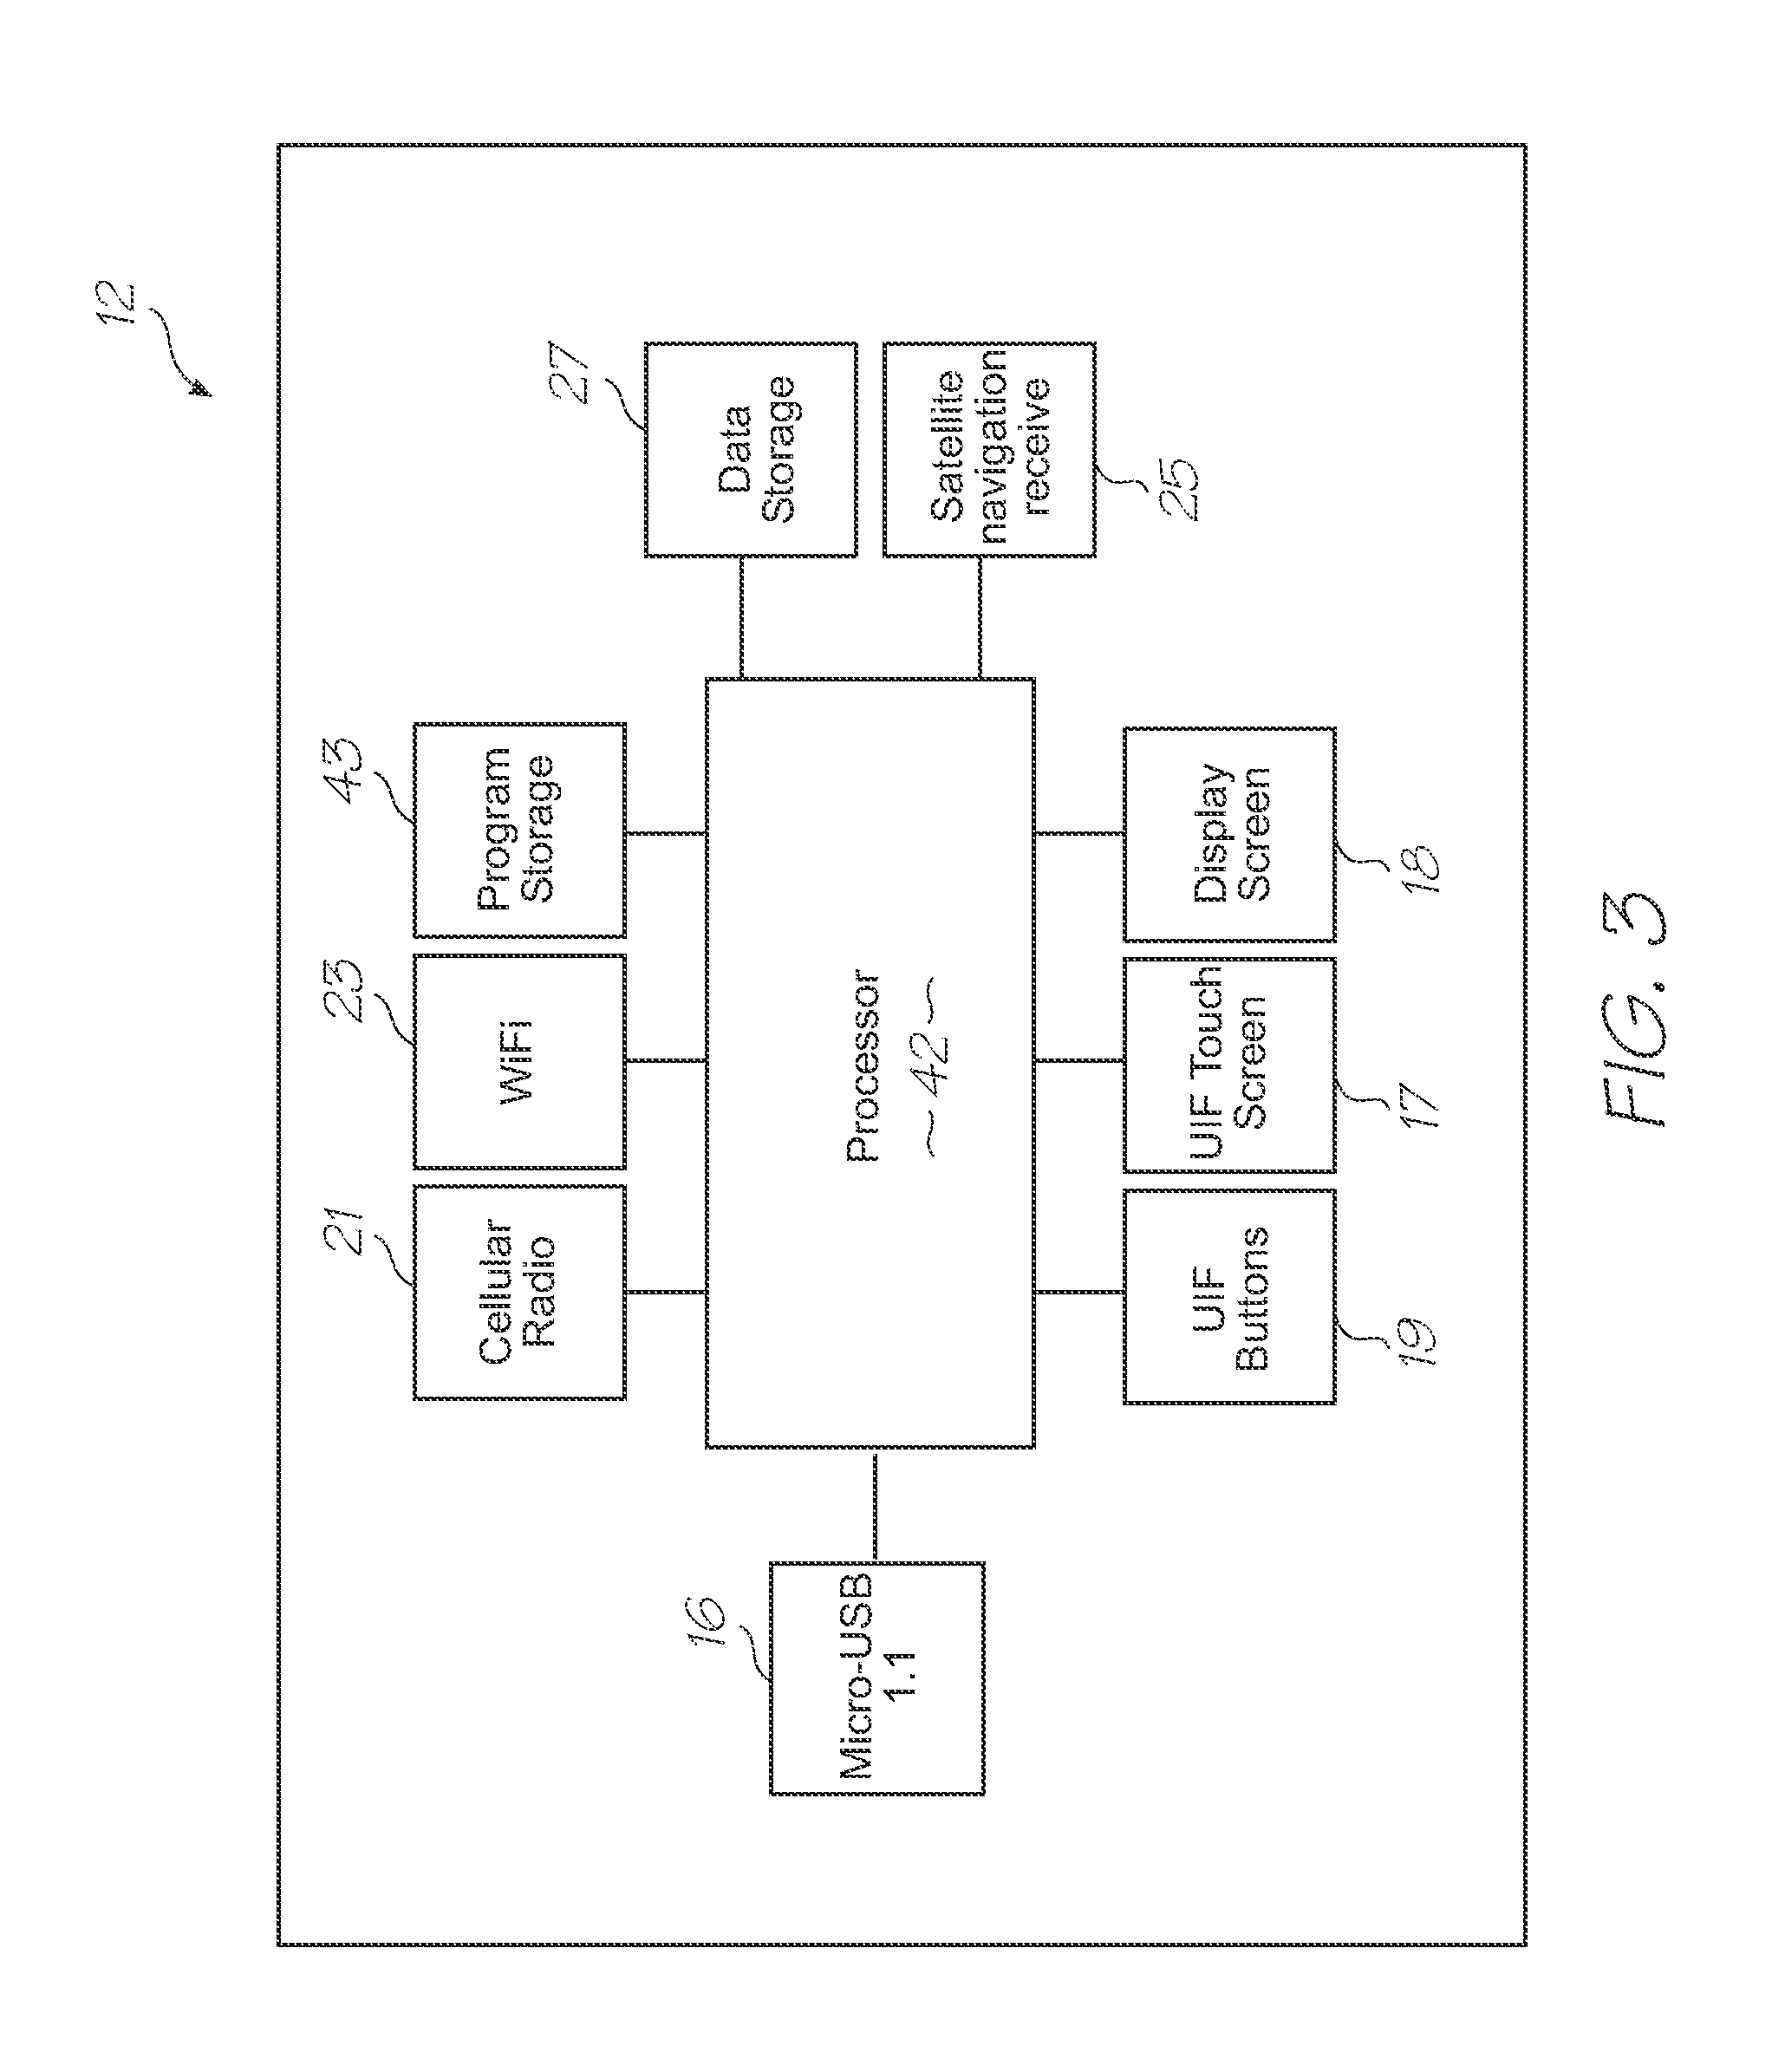 Microfluidic device with thermal lysis section